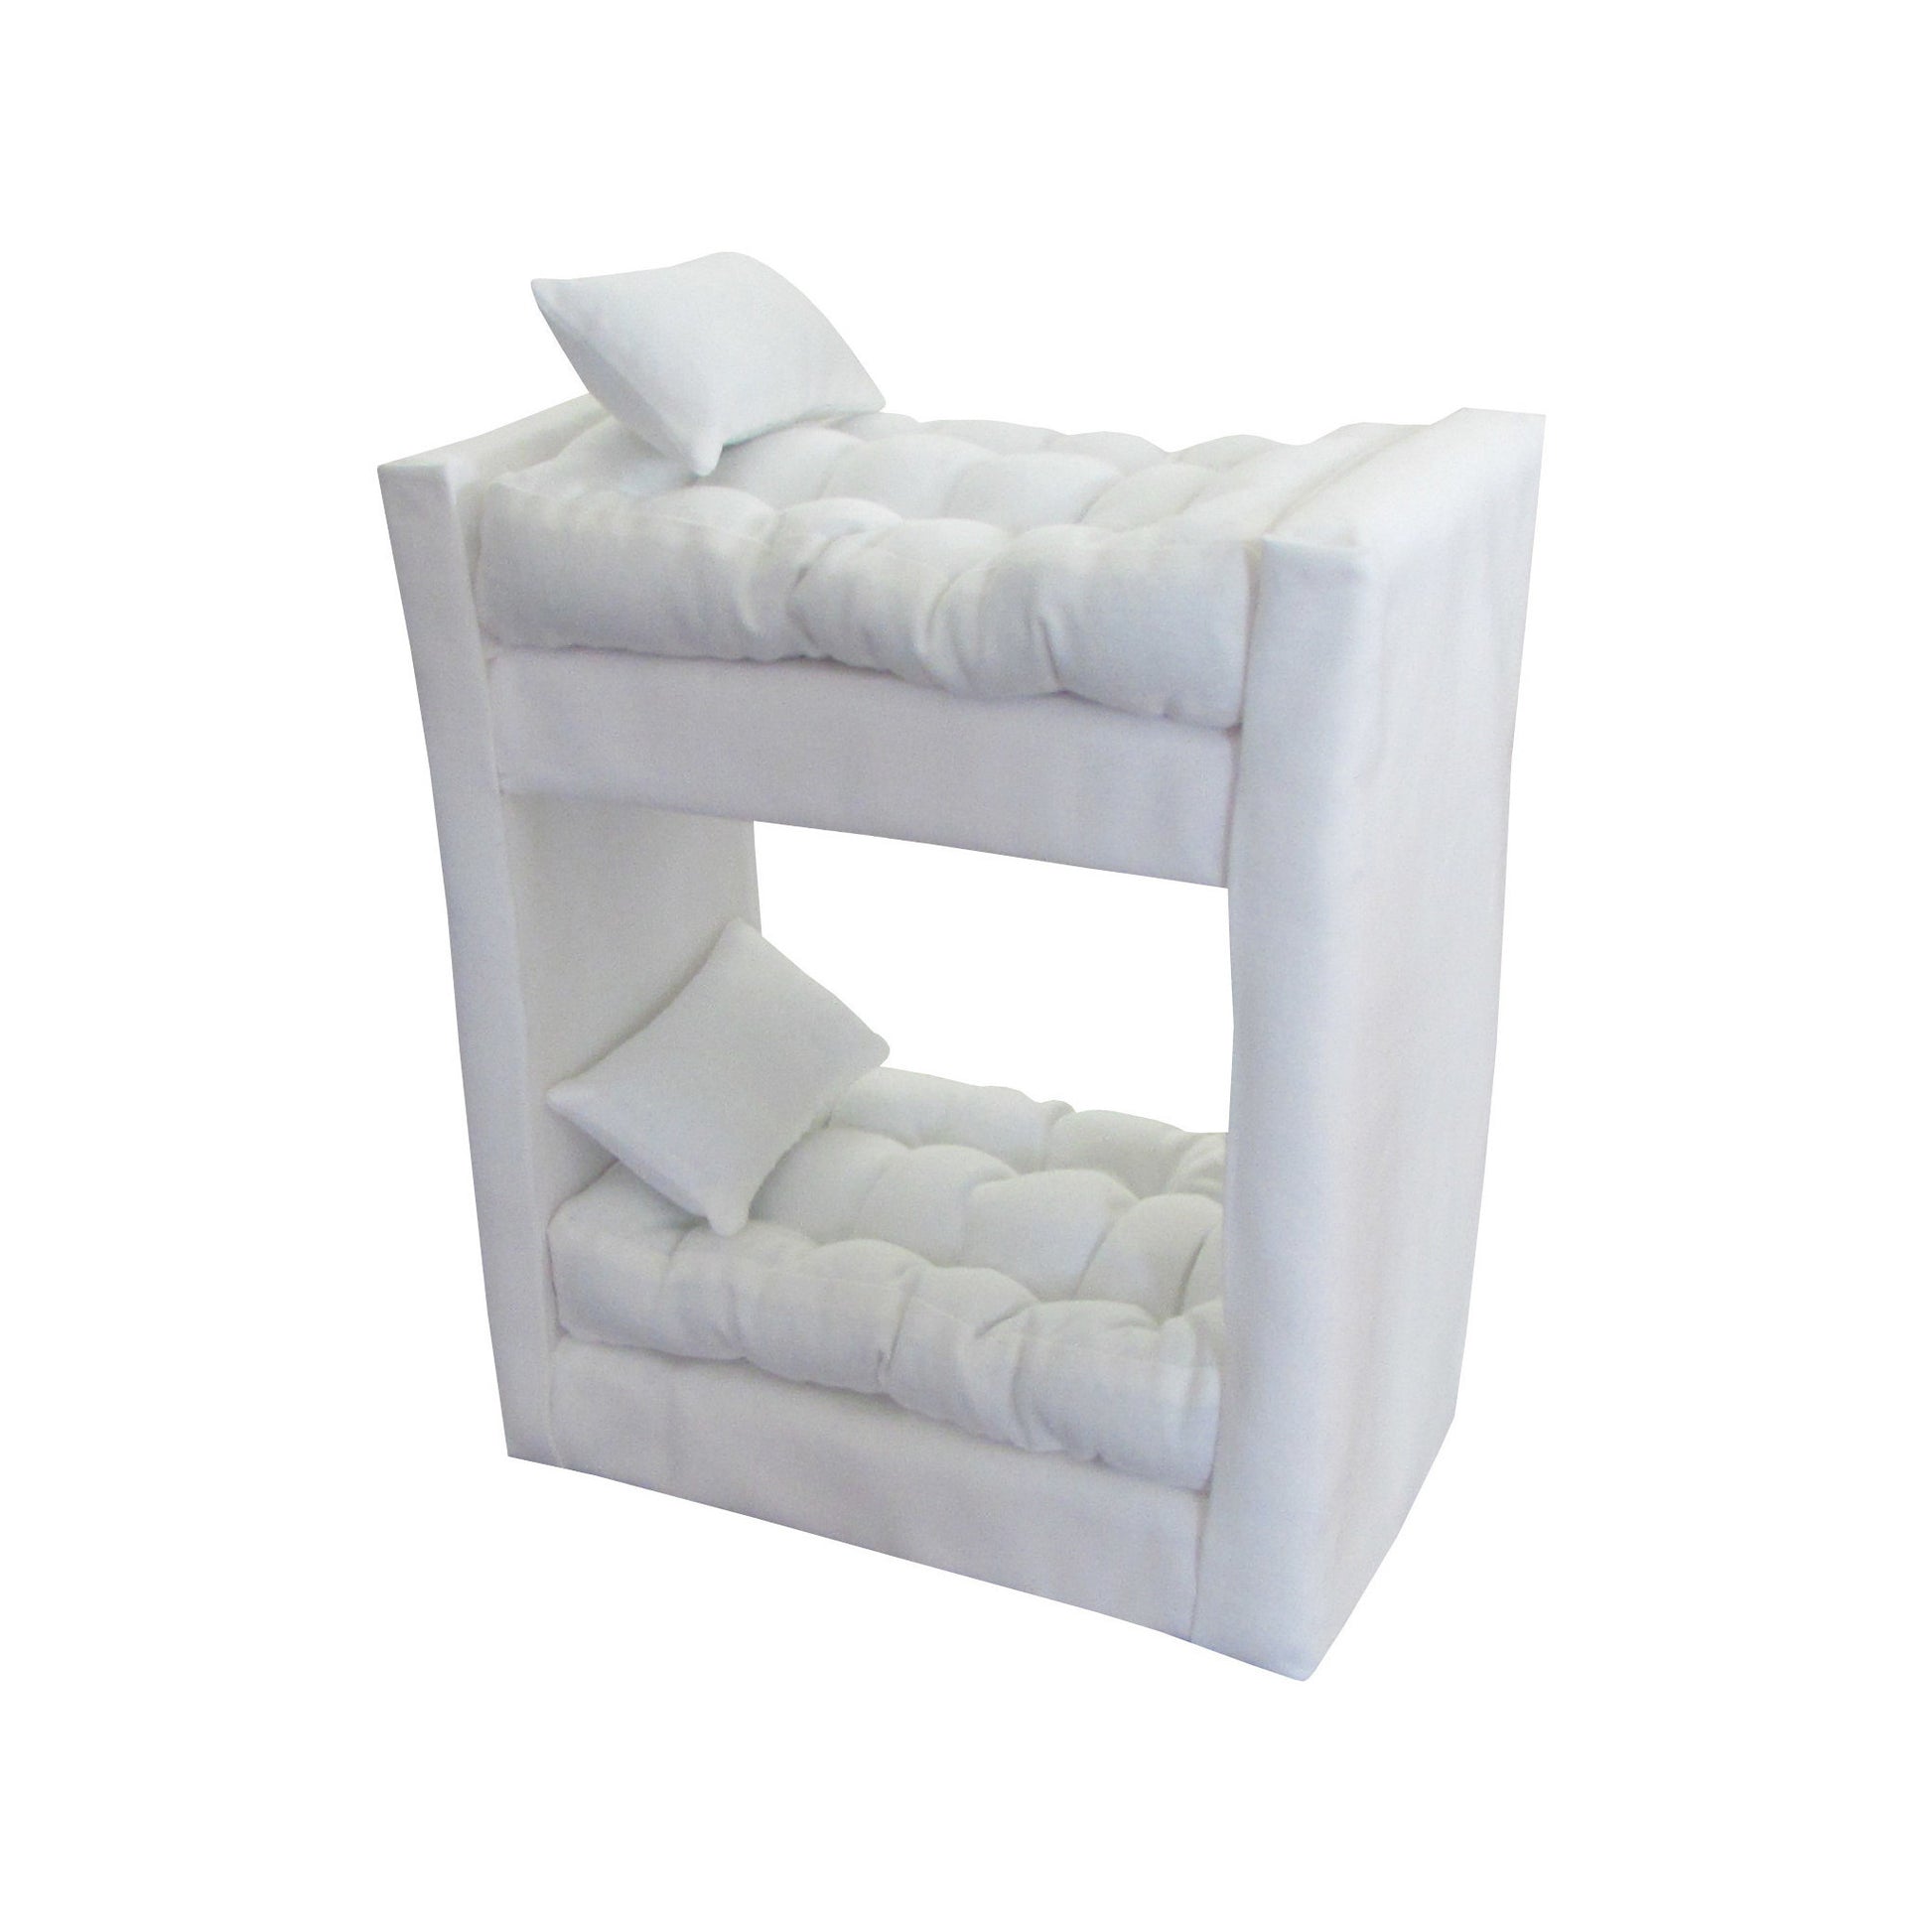 Upholstered White Doll Bunk Bed for 6.5-inch dolls